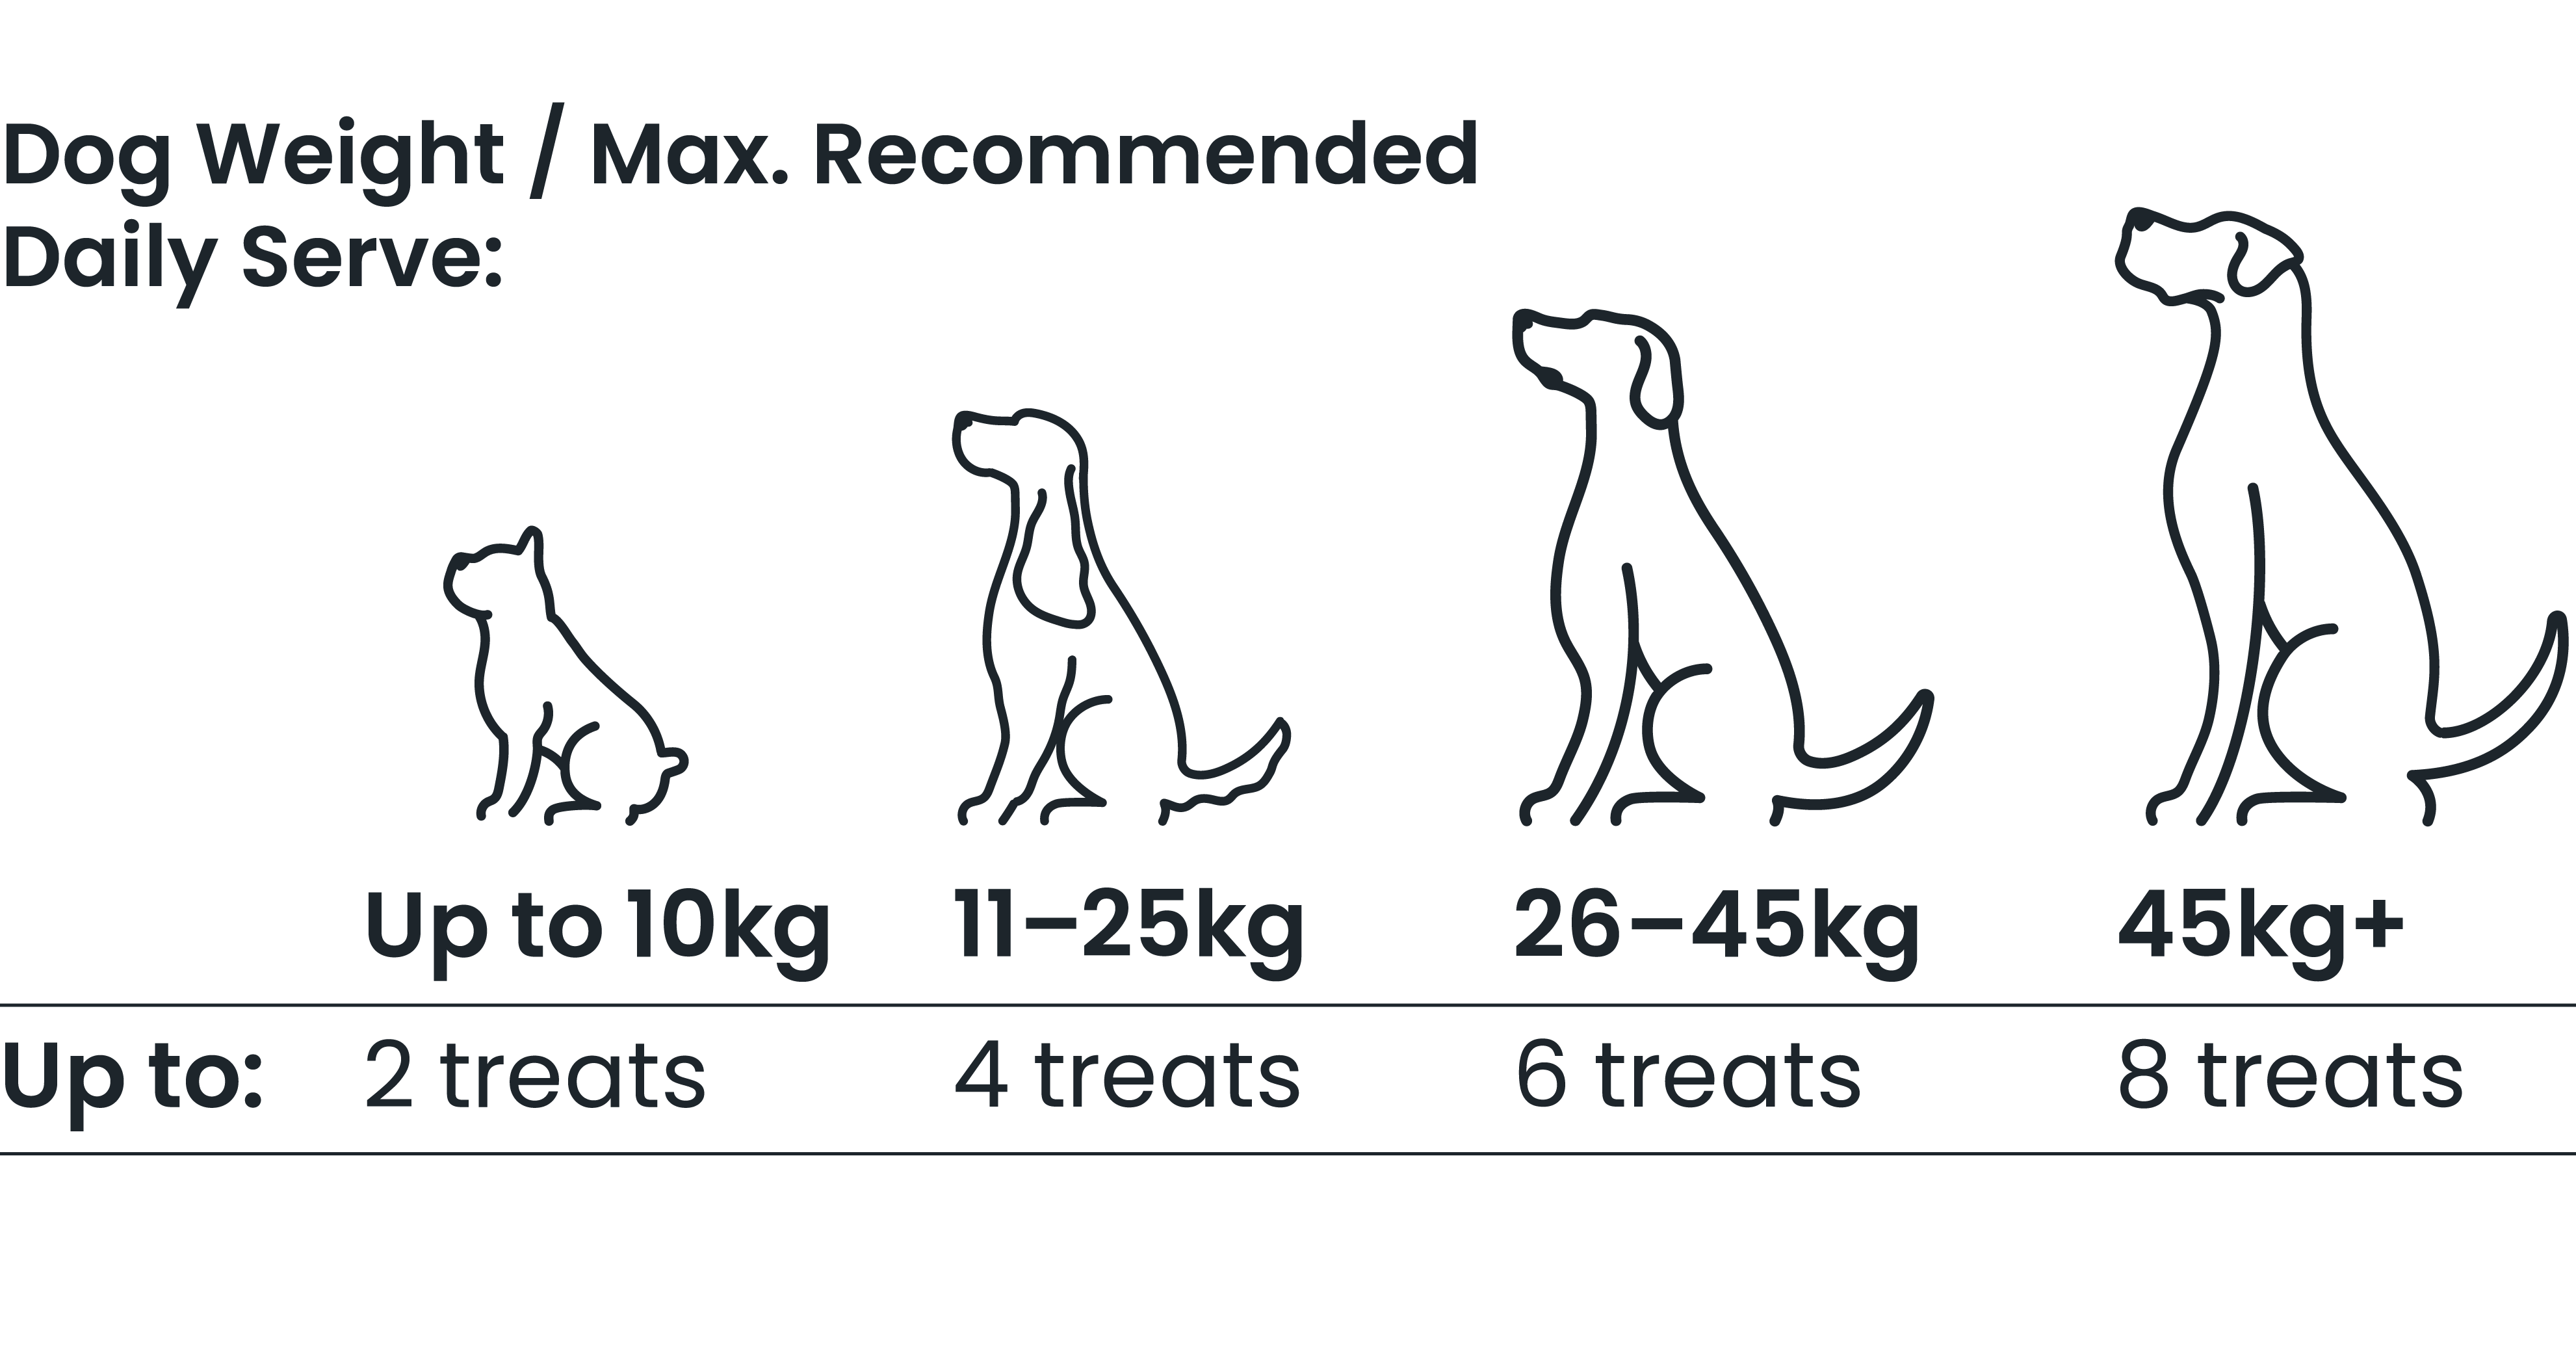 ZamiPet HappiTreats Skin &amp; Coat feeding guide. For dogs up to 10kg, max 2 treats per day. For 11kg-25kg dogs, up to 4 treats per day. For 26-45kg dogs, up to 6 treats per day. For dogs 45kg and over, up to 8 treats per day. 